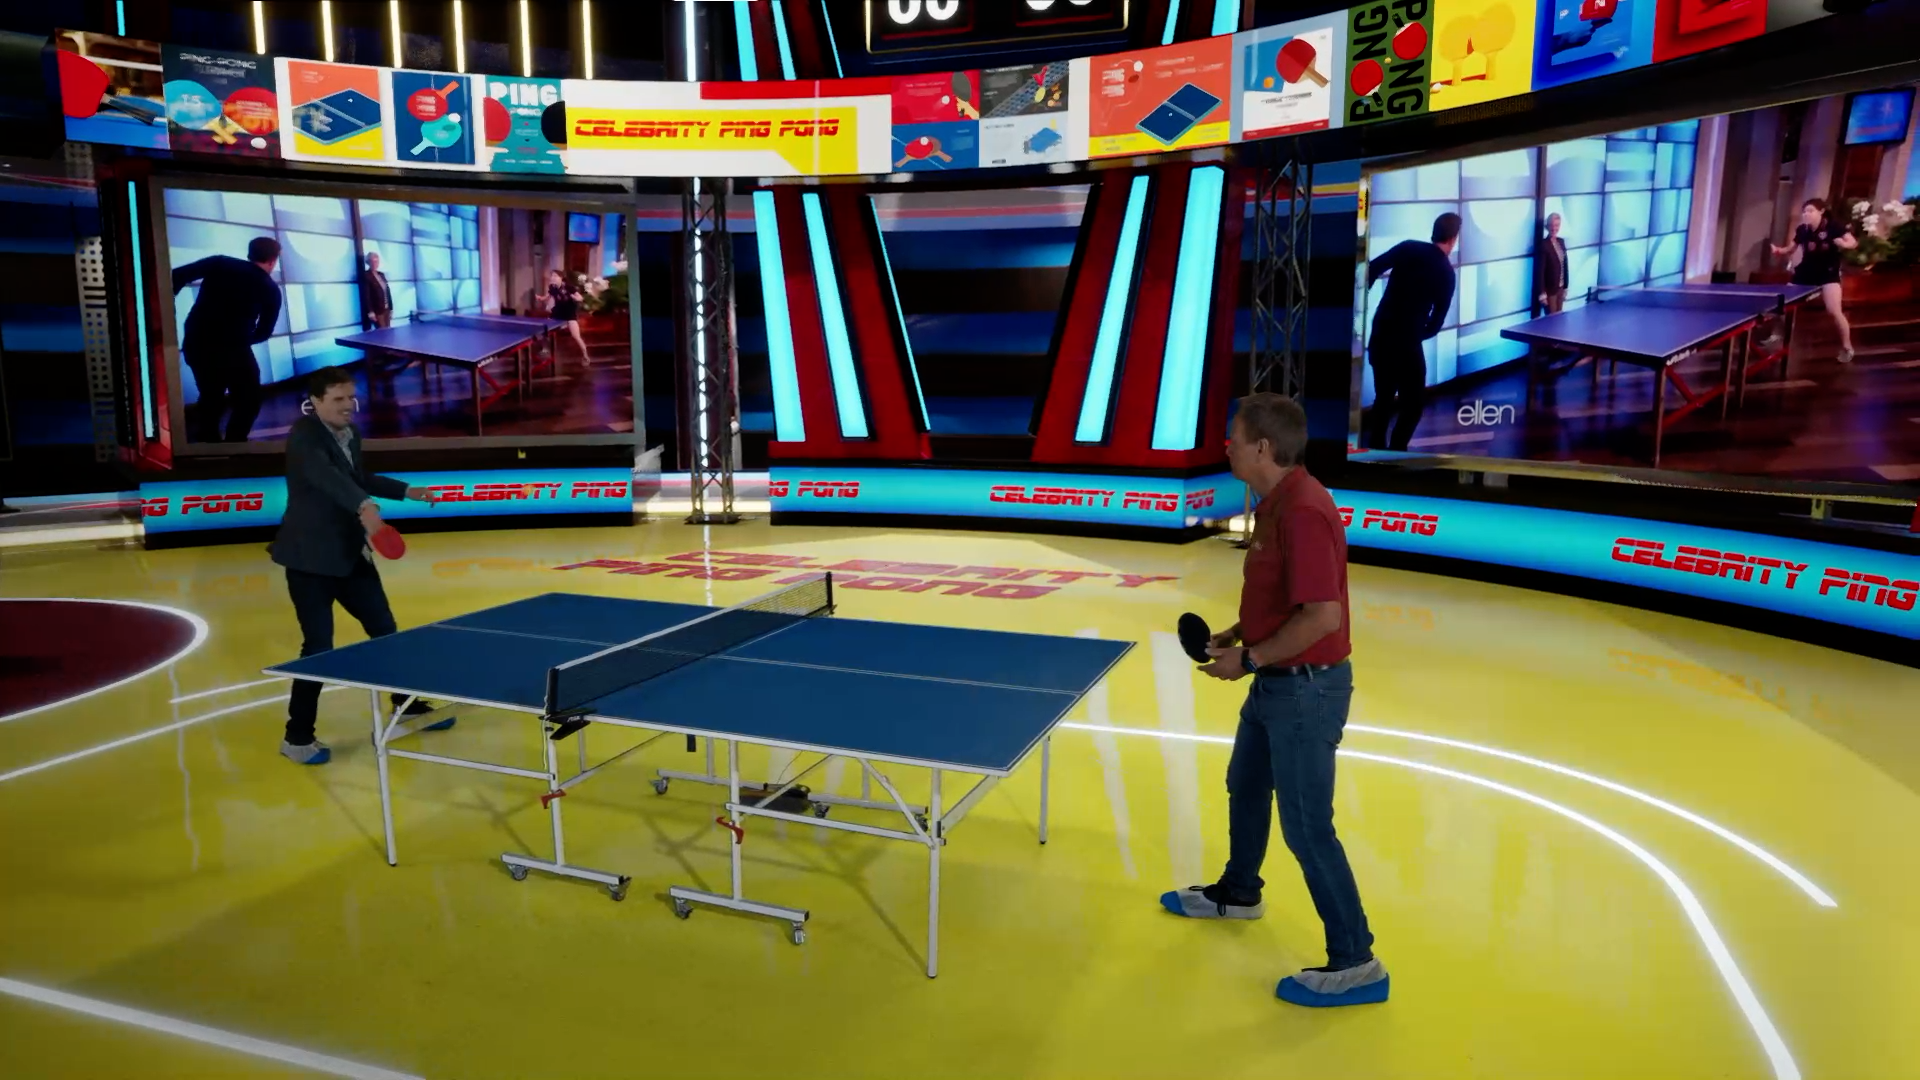 What are the different game formats in ping-pong?